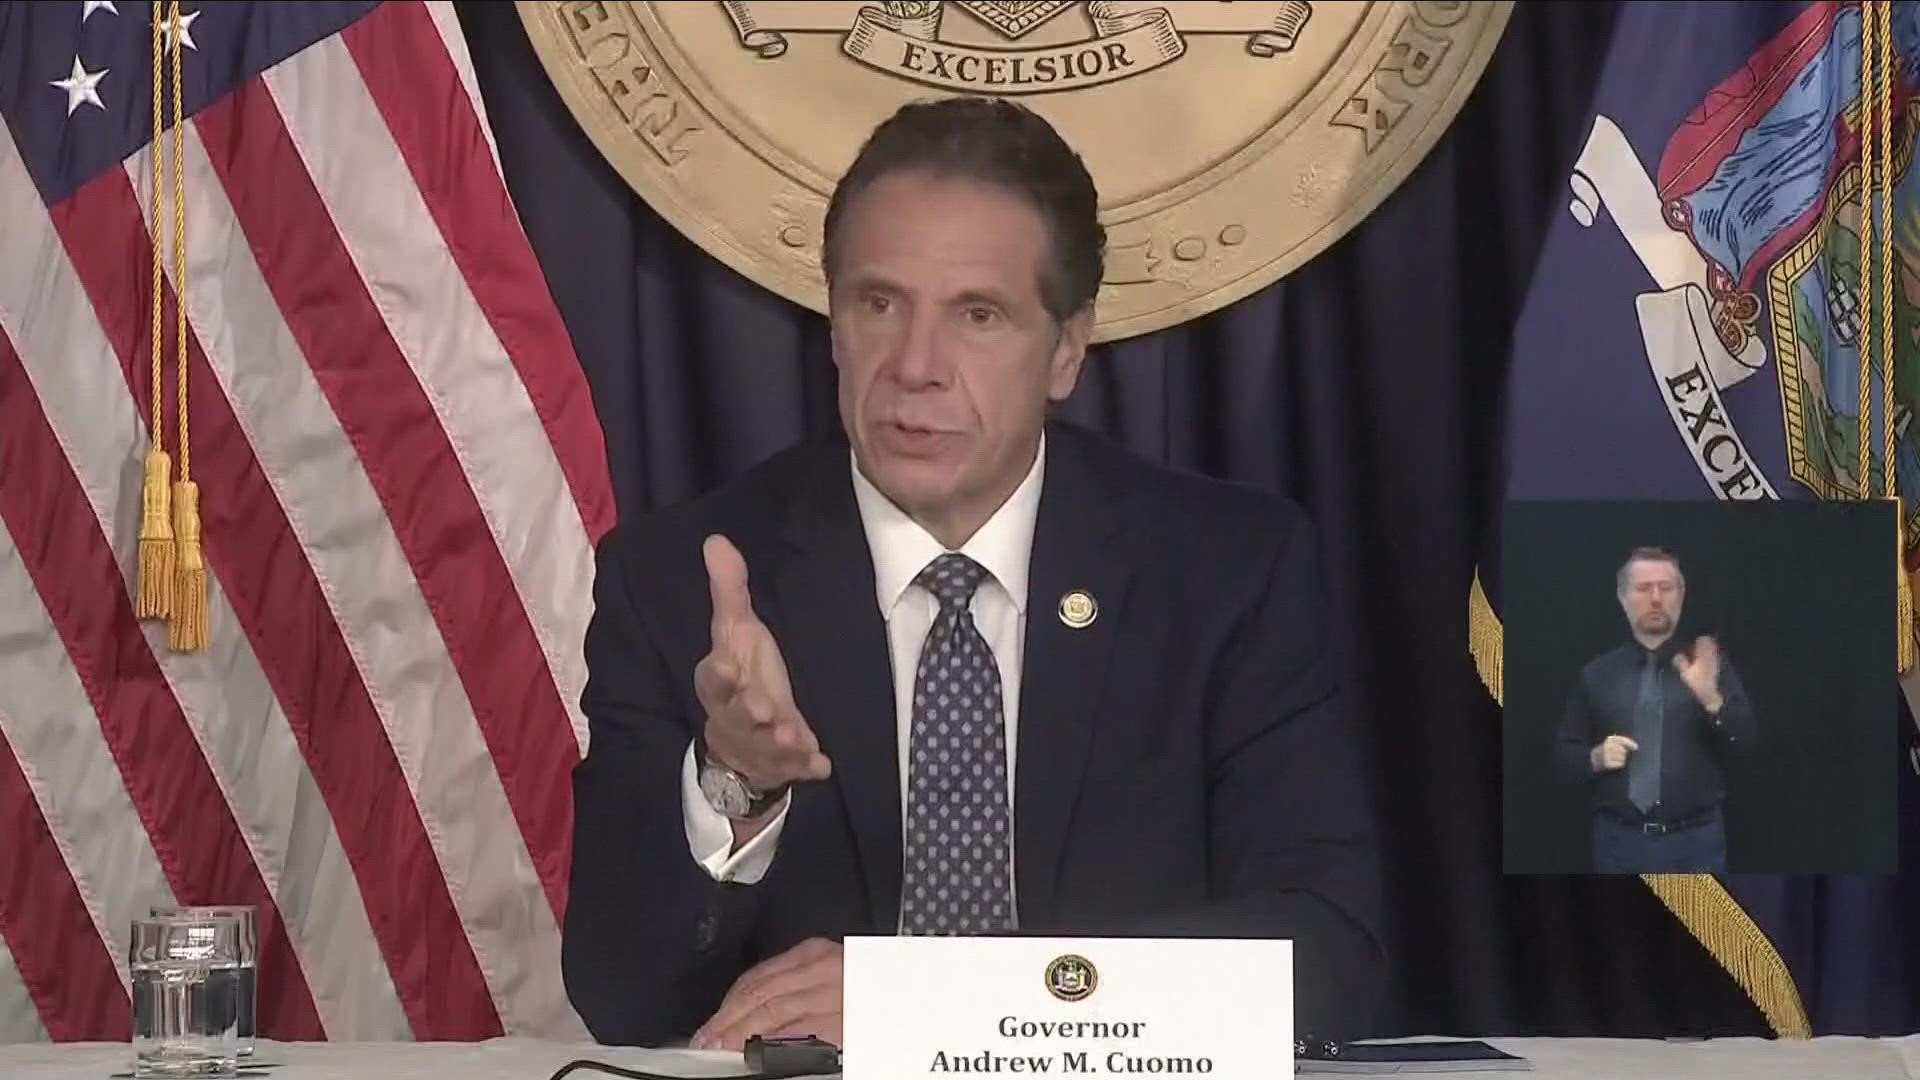 New York's inspector general says a state trooper should have been disciplined for being romantically involved with a daughter of former governor Andrew Cuomo.